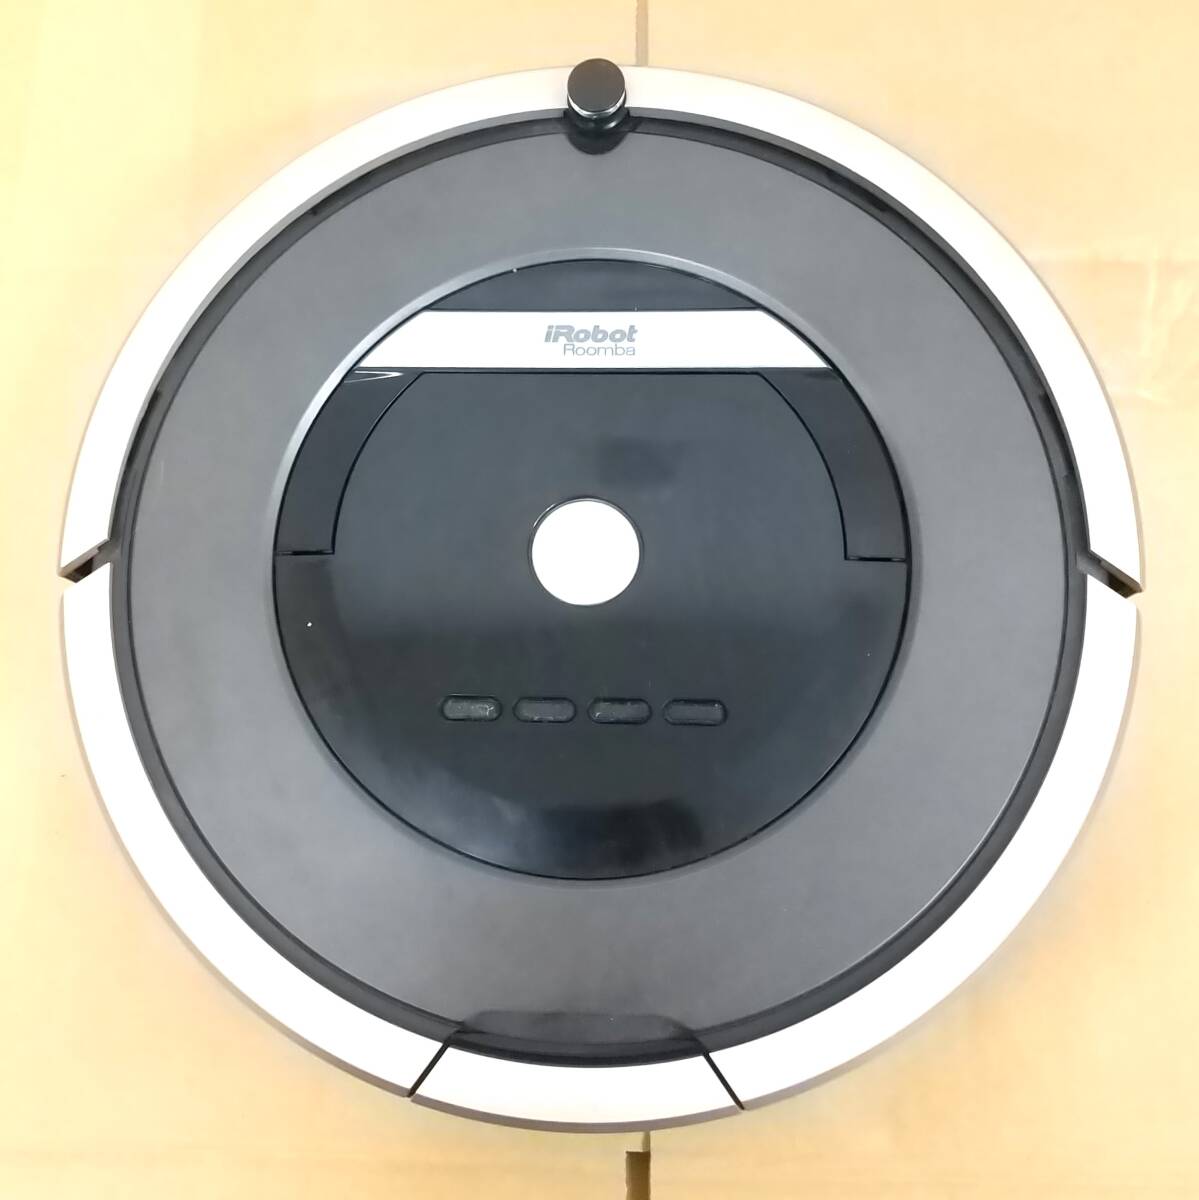 [766] secondhand goods 2014 year made I robot roomba 871